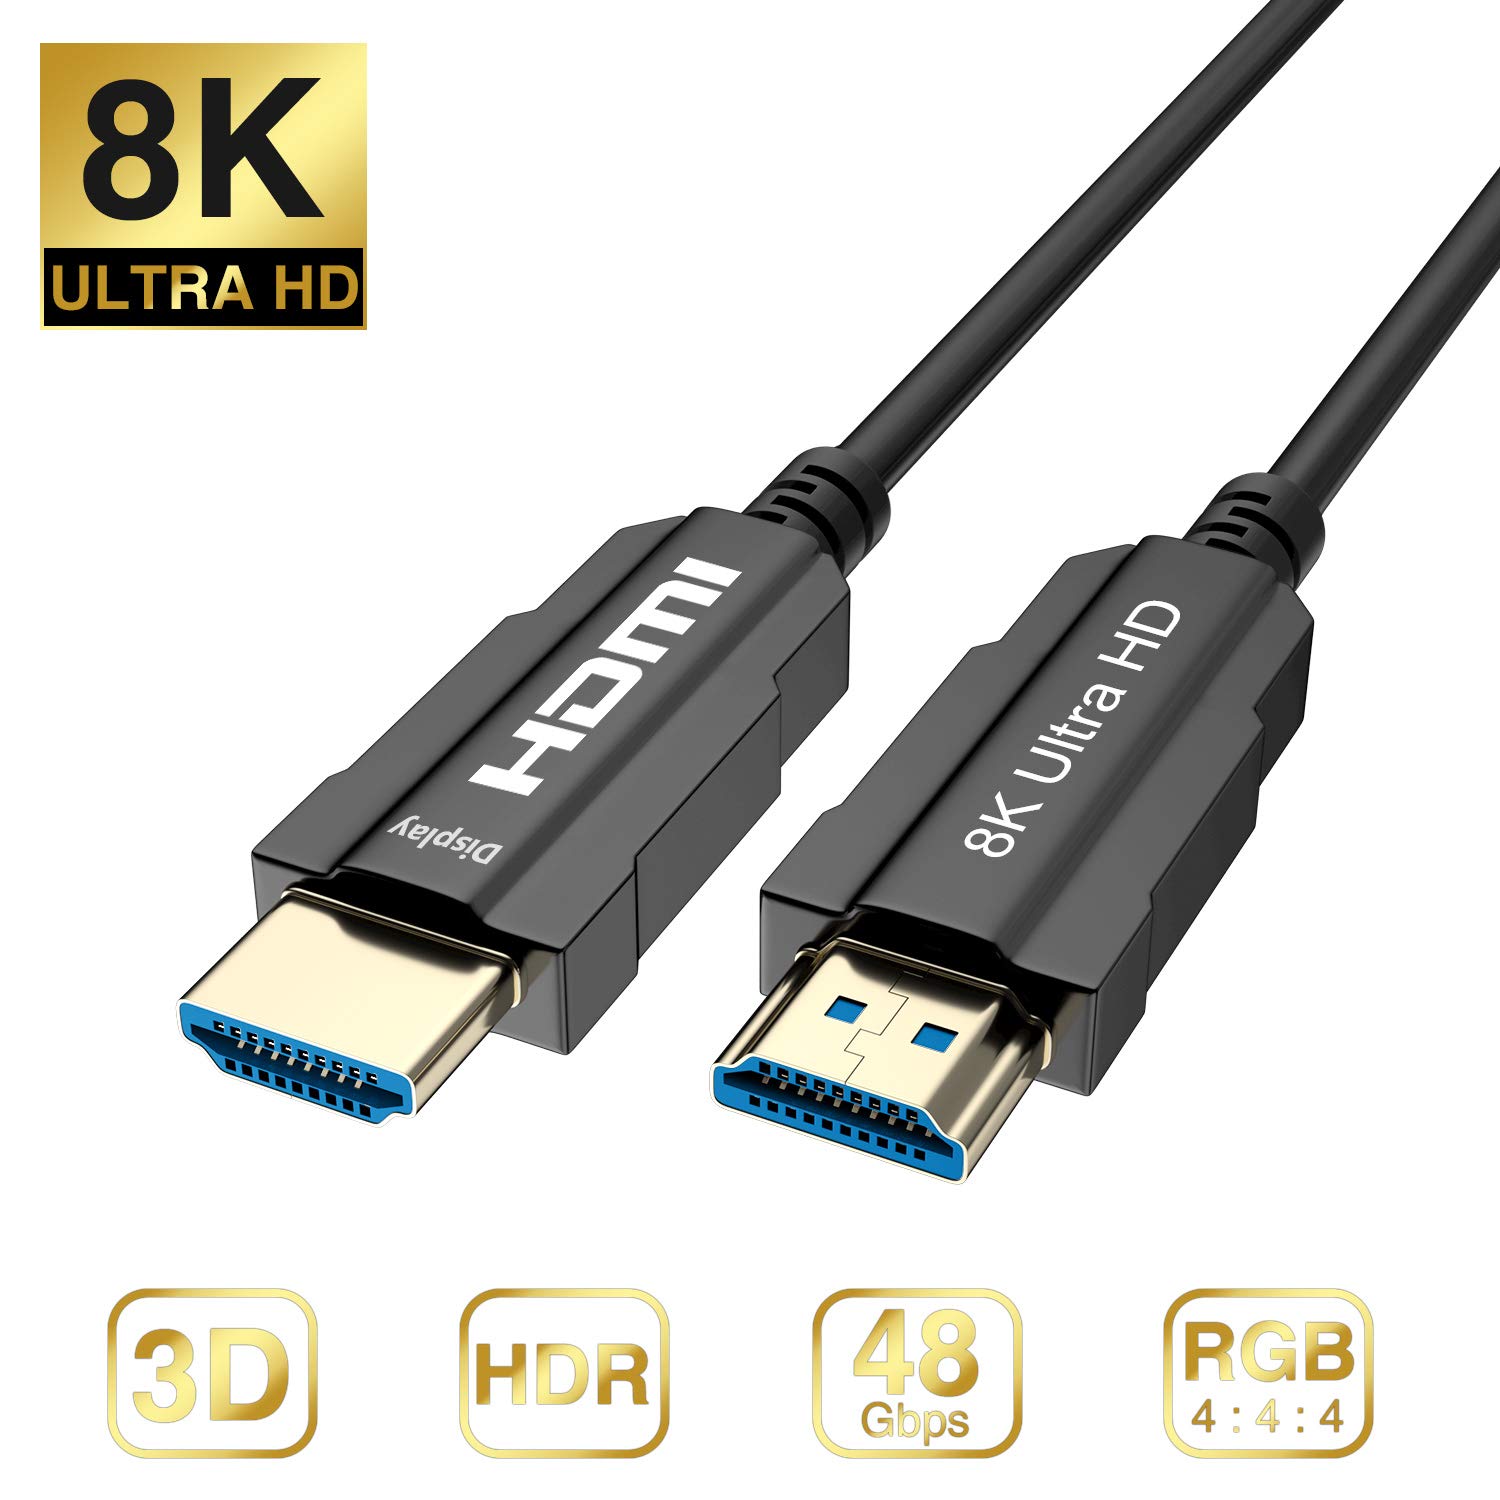 CABLEDECONN 8K HDMI Cable UHD HDR 8K(7680x4320) High Speed 48Gbps 